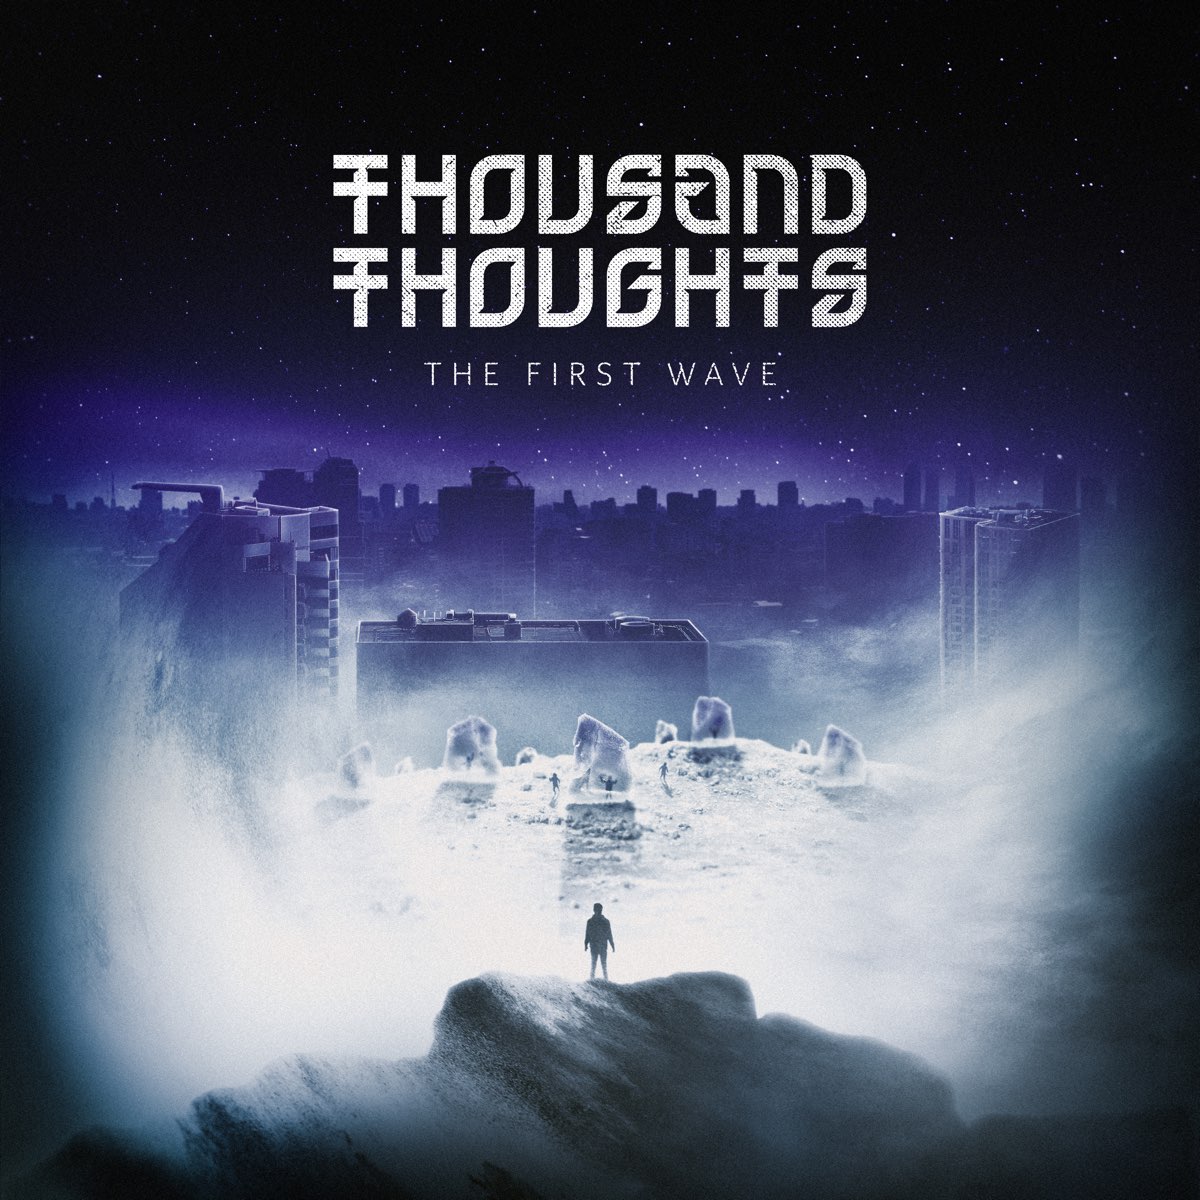 ‎The First Wave - EP de Thousand Thoughts en Apple Music